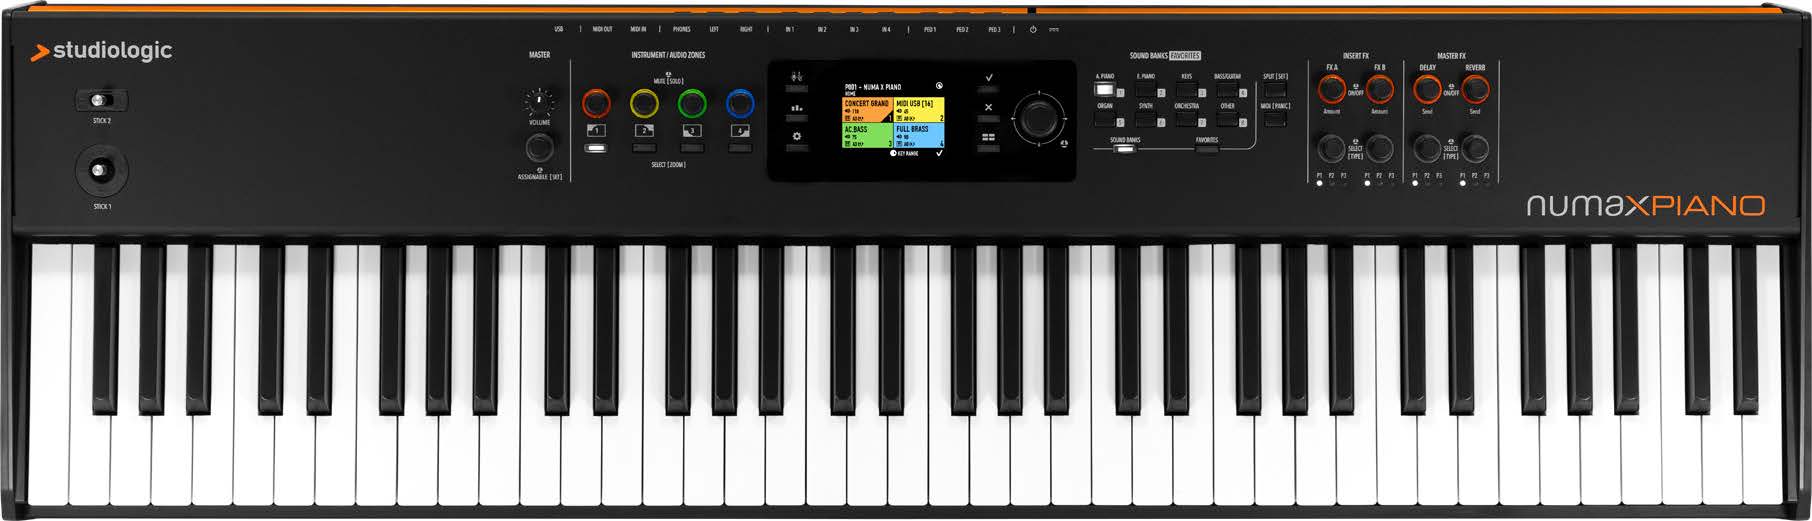 Studiologic-Fatar NUMA X 73-Key Piano With Fatar Hammer Keyboard TP/110 With 3 Contacts And Aftertouch NUMA-X-PIANO-73